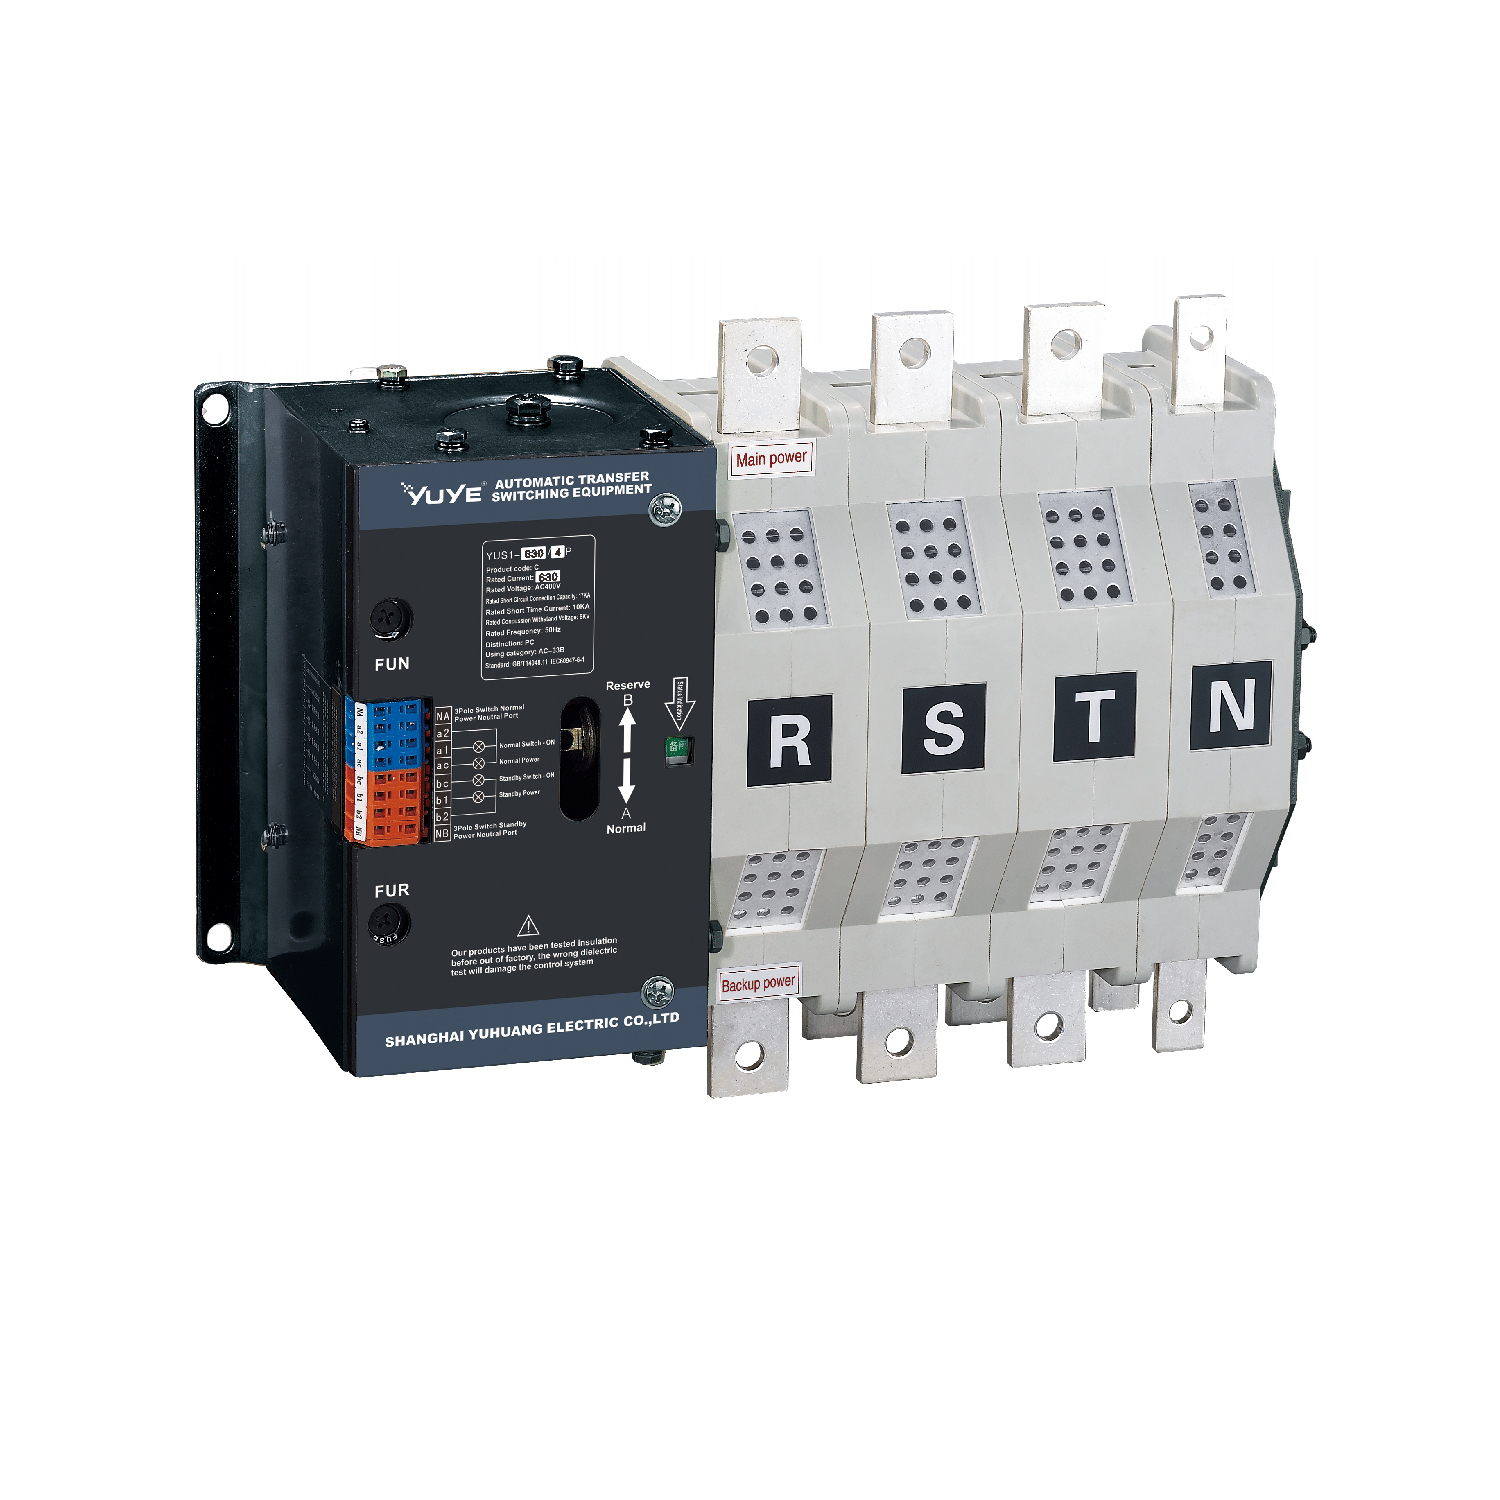 PC Automatic transfer switch YES1-400C Featured Image